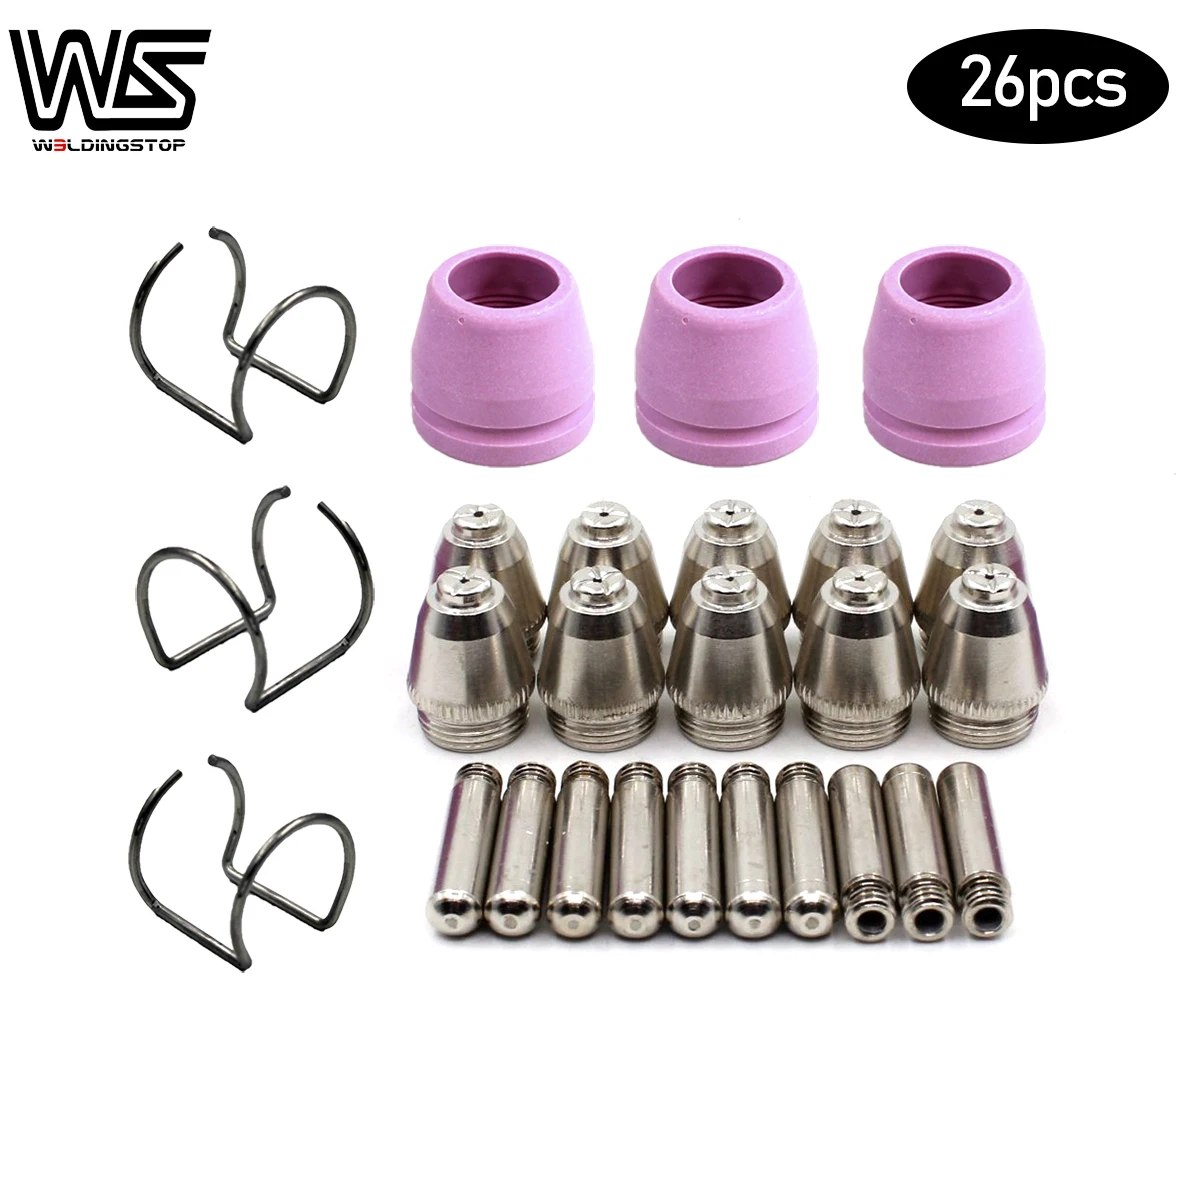 

SG-55 AG-60 WSD60 WSD60P Plasma Cutting Torch Electrode Nozzle Tips Consumables for SG55 AG60 PKG/26